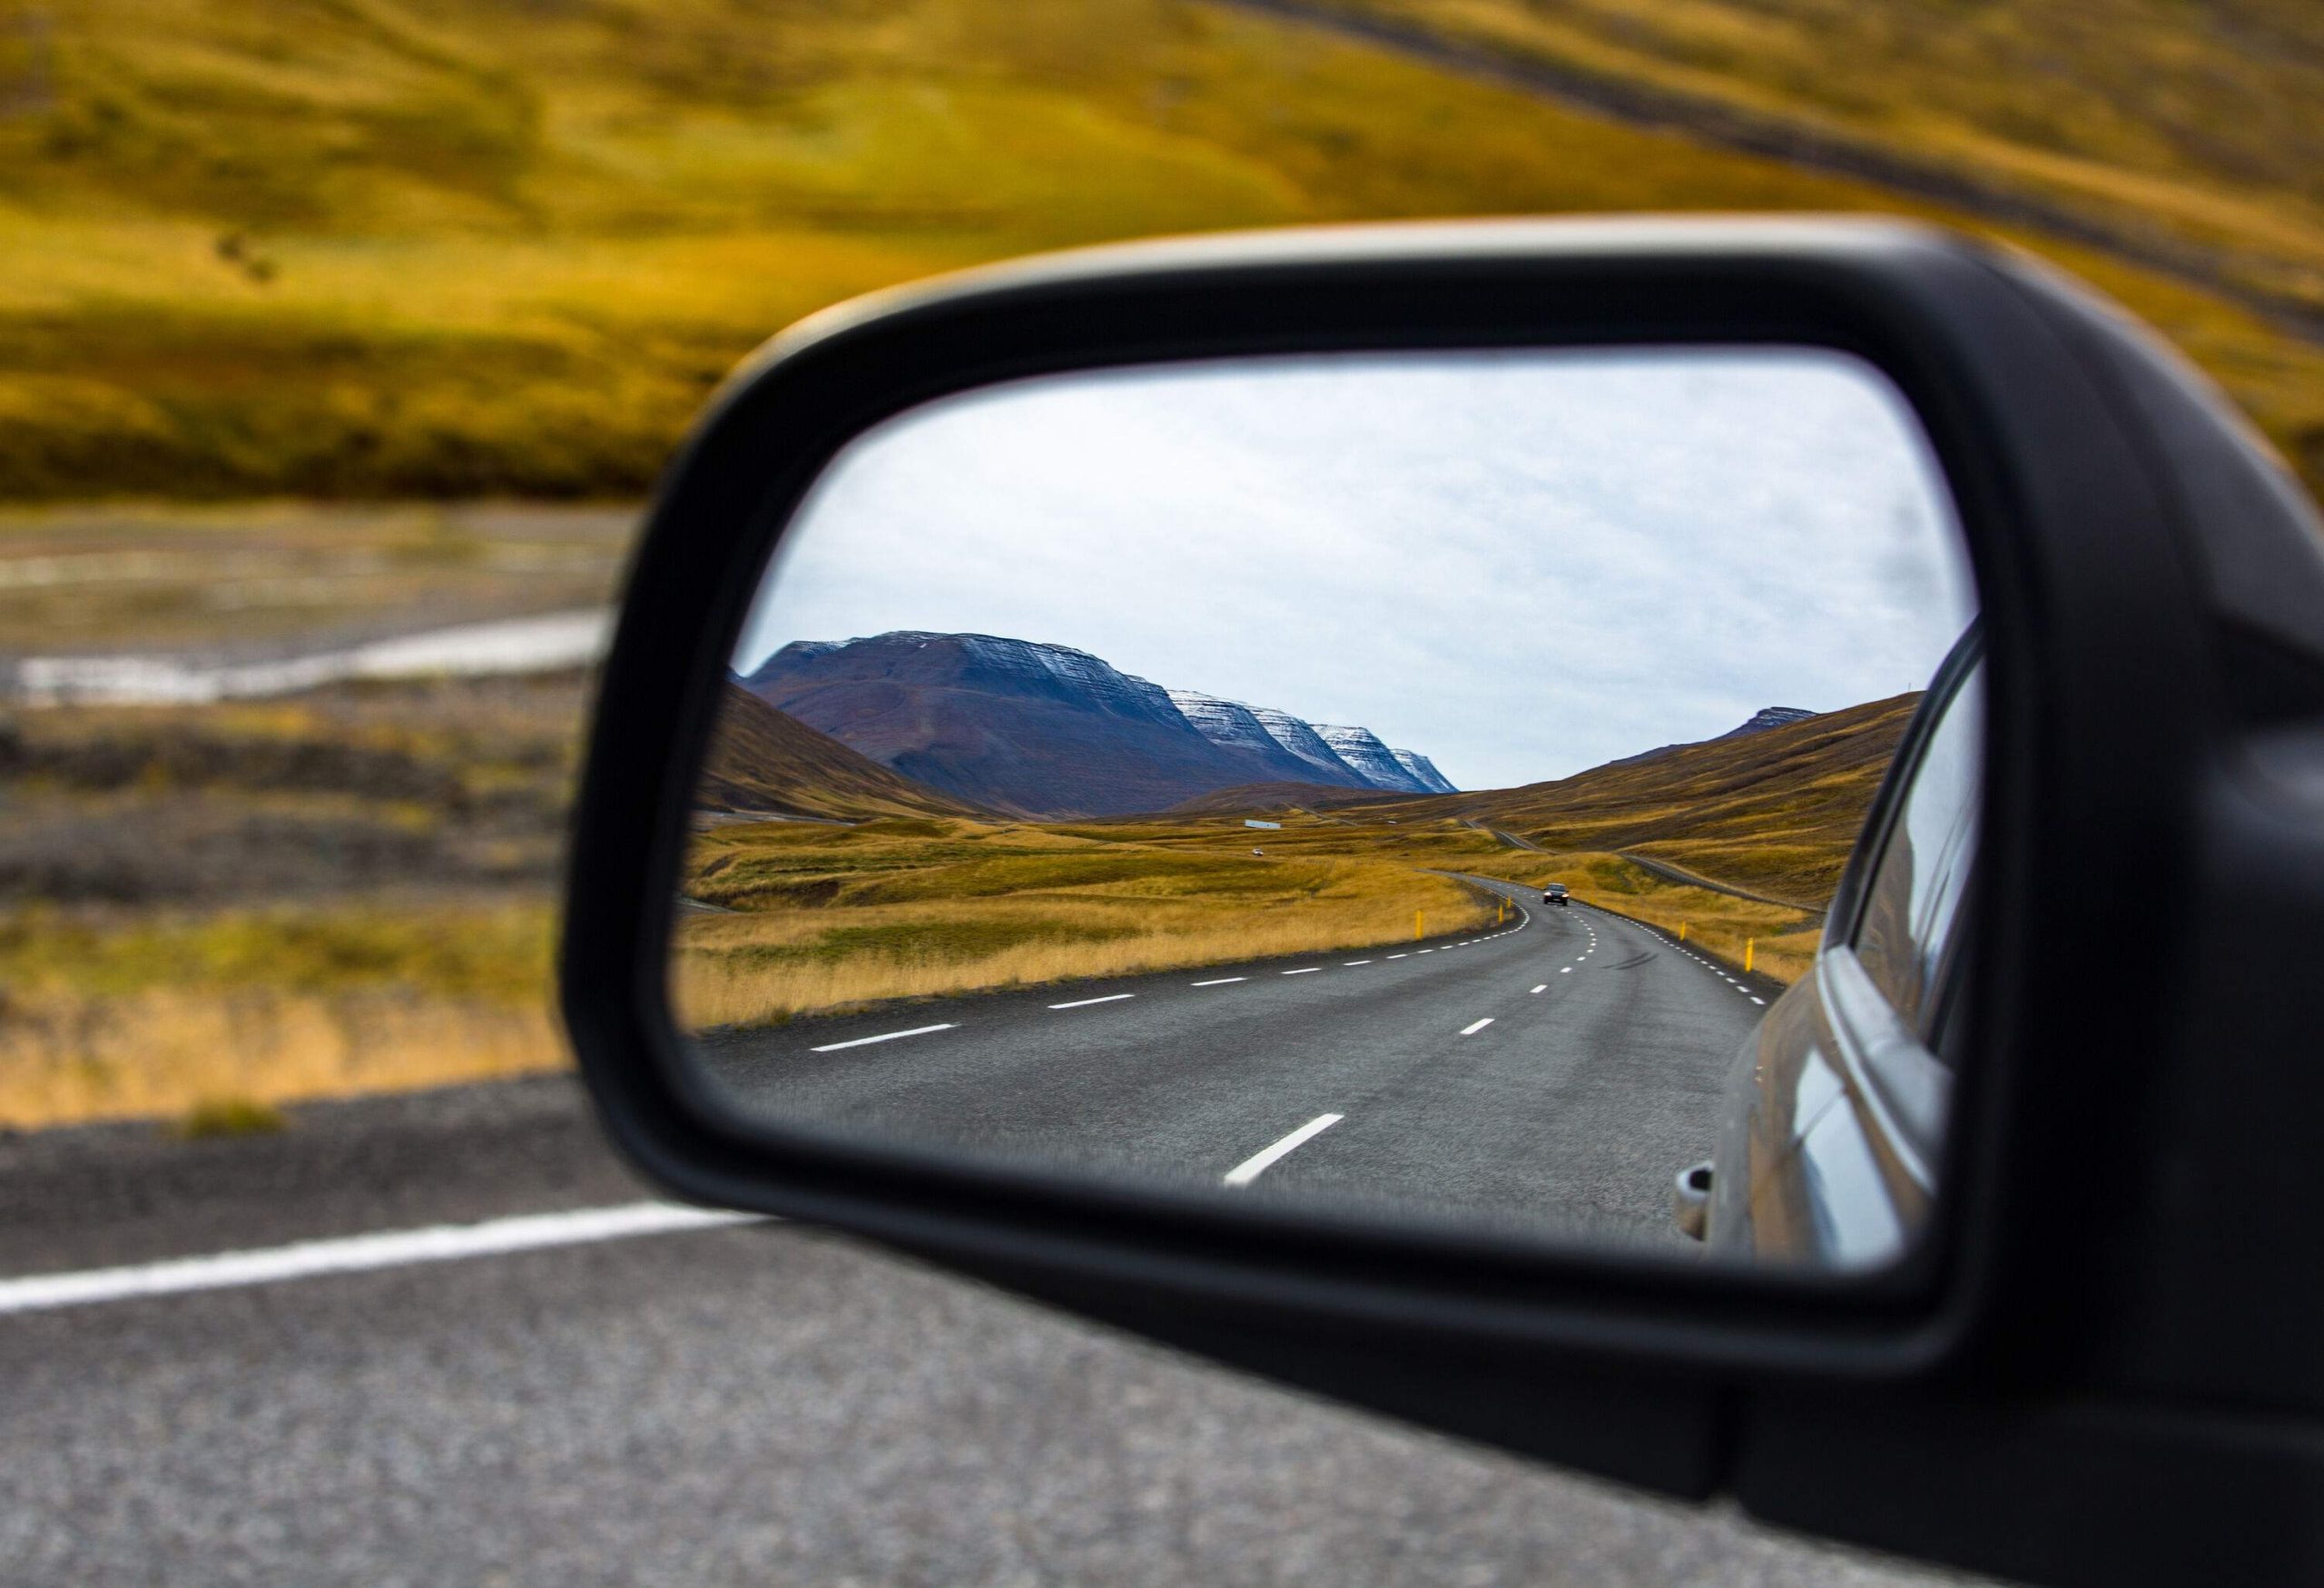 A car's side mirror with a reflection of an empty highway across a grass field.